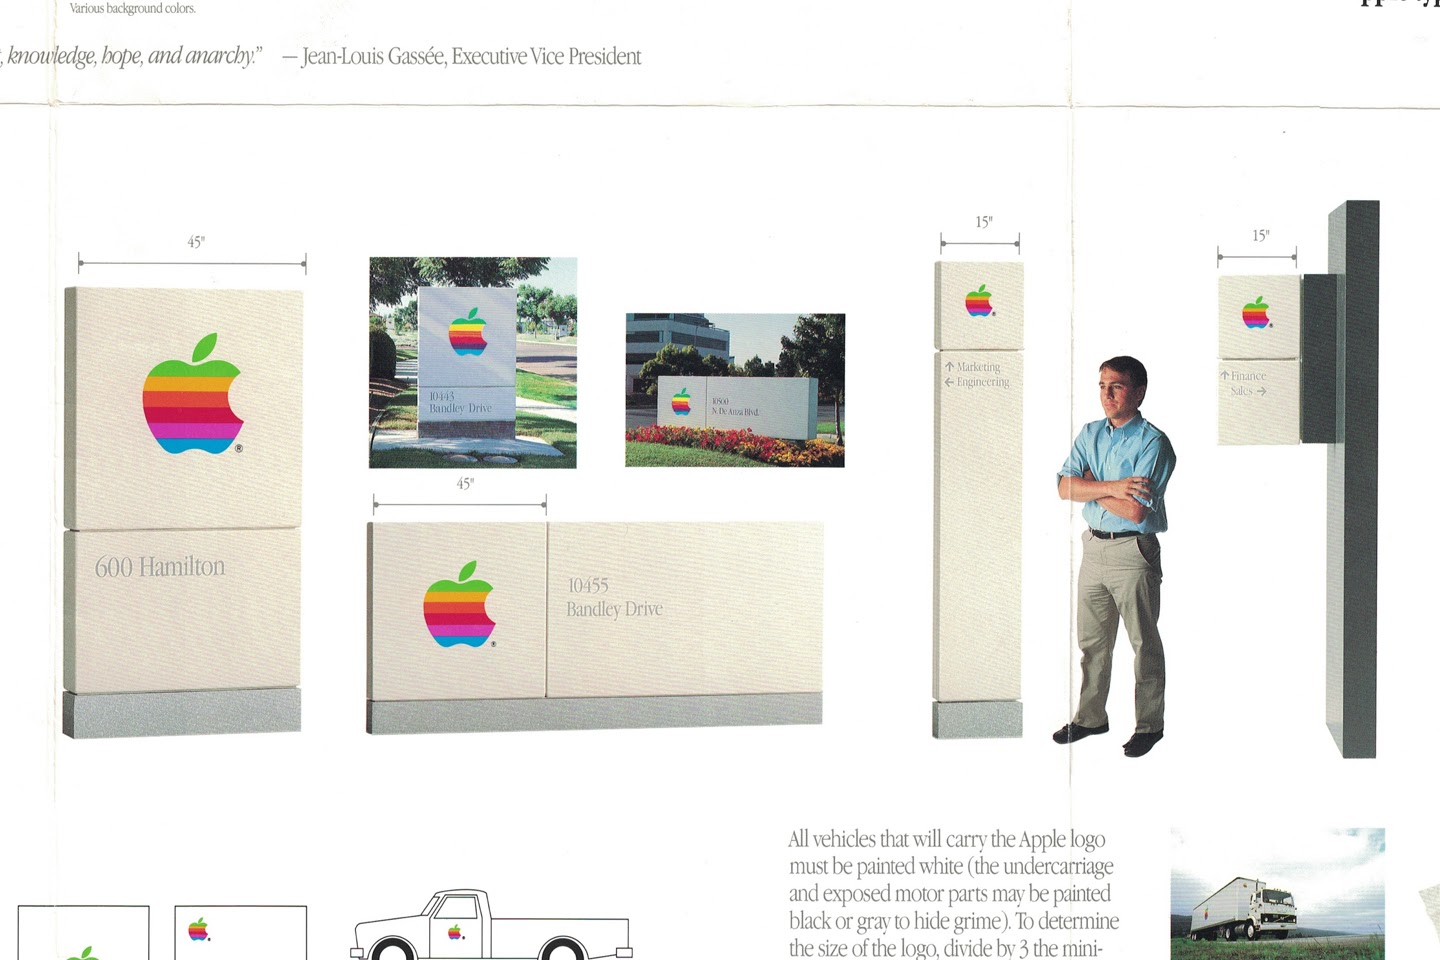 A visual identity system for the Apple logo featuring signage of various sizes. 